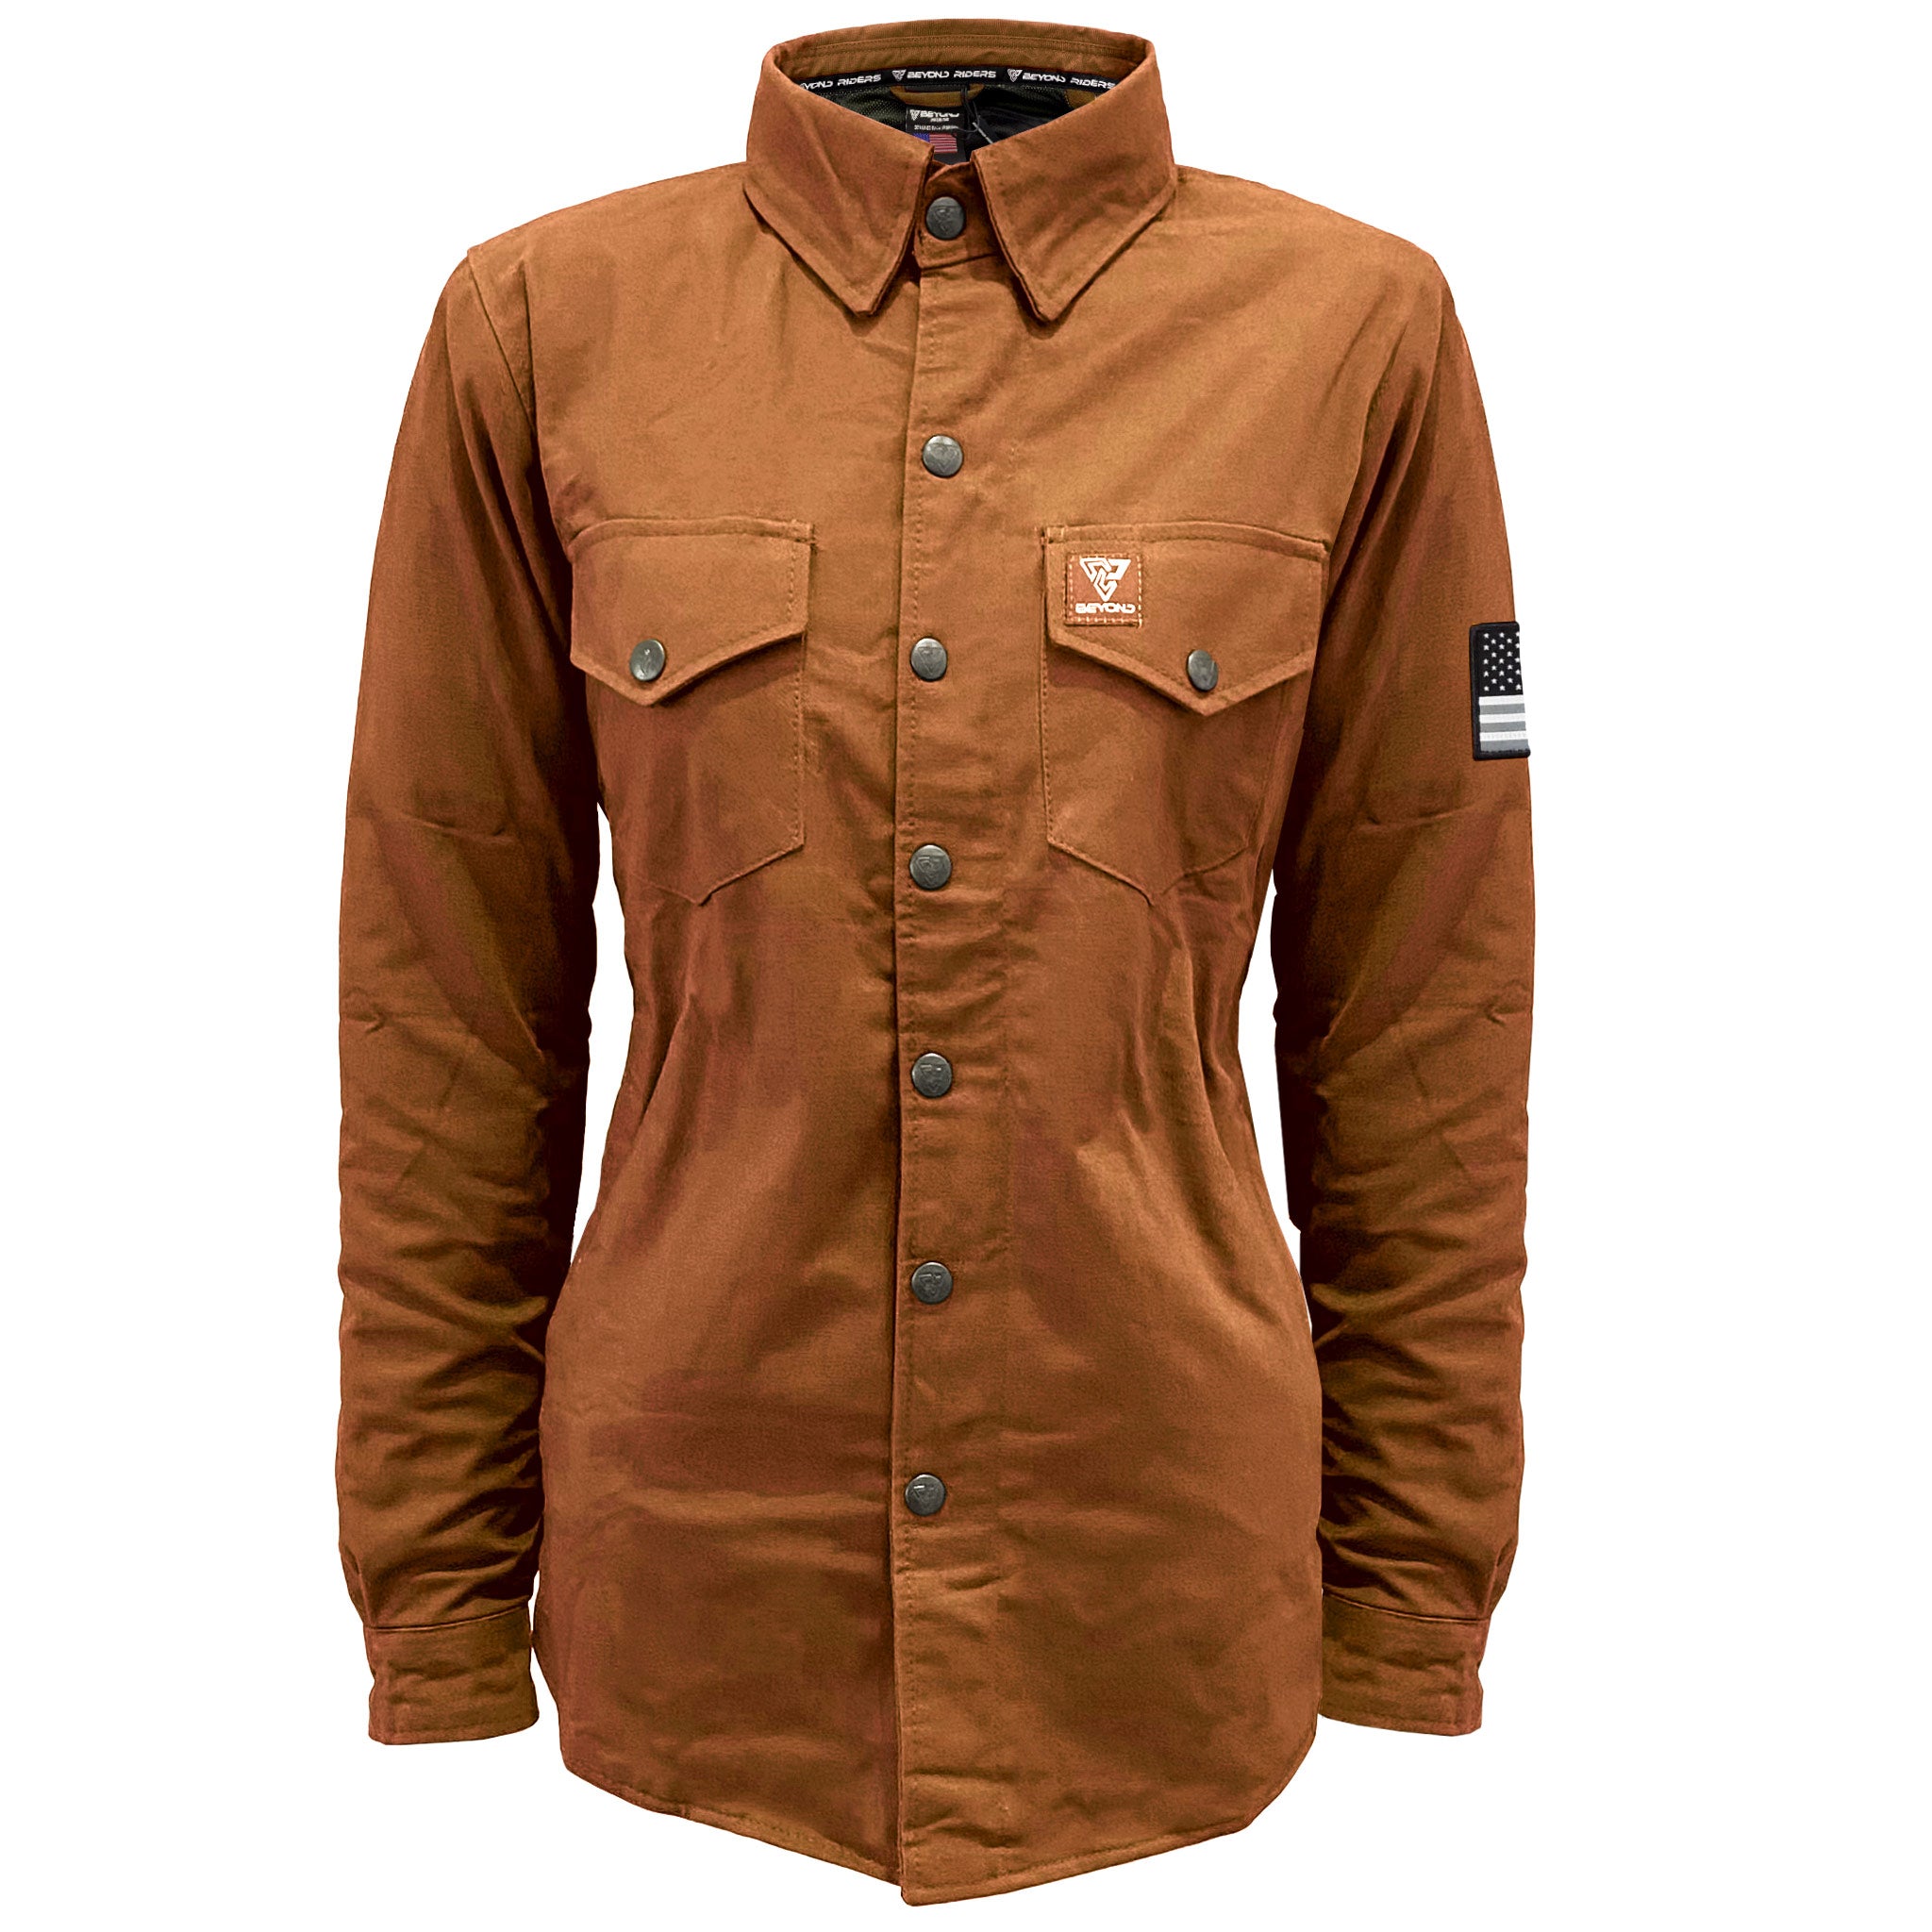 Protective Canvas Jacket for Women - Light Brown